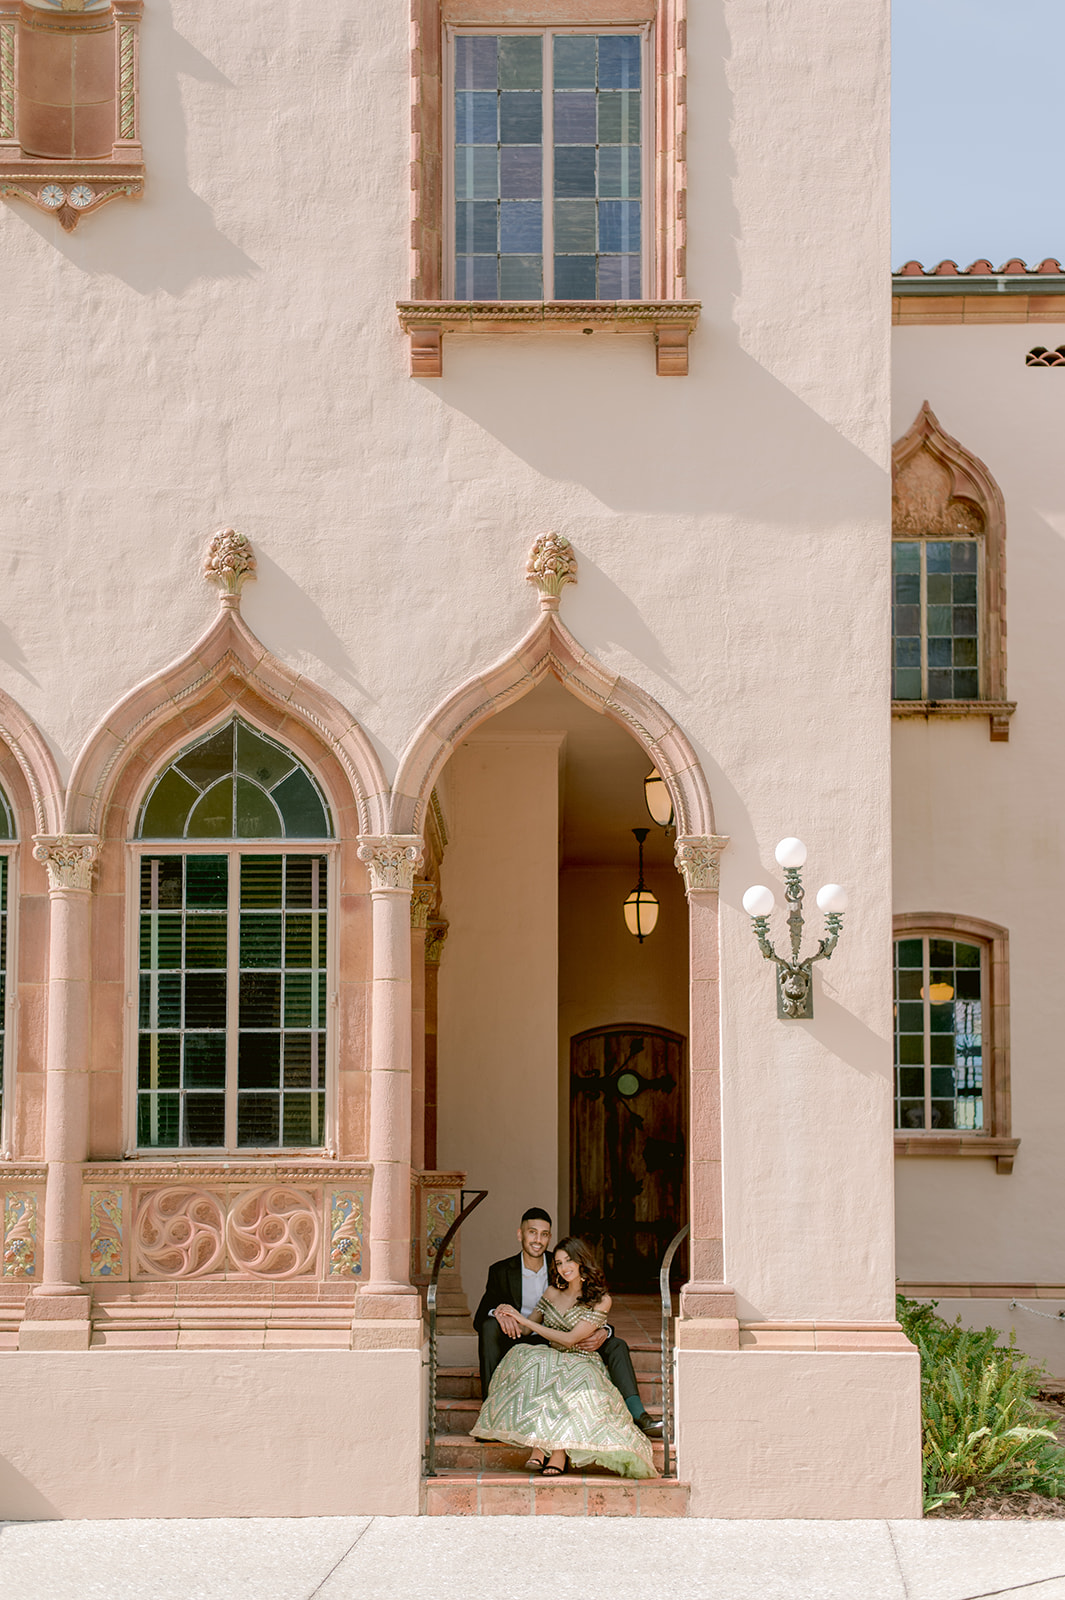 "Romantic and elegant engagement session features stunning Indian couple at the Ringling Museum"
